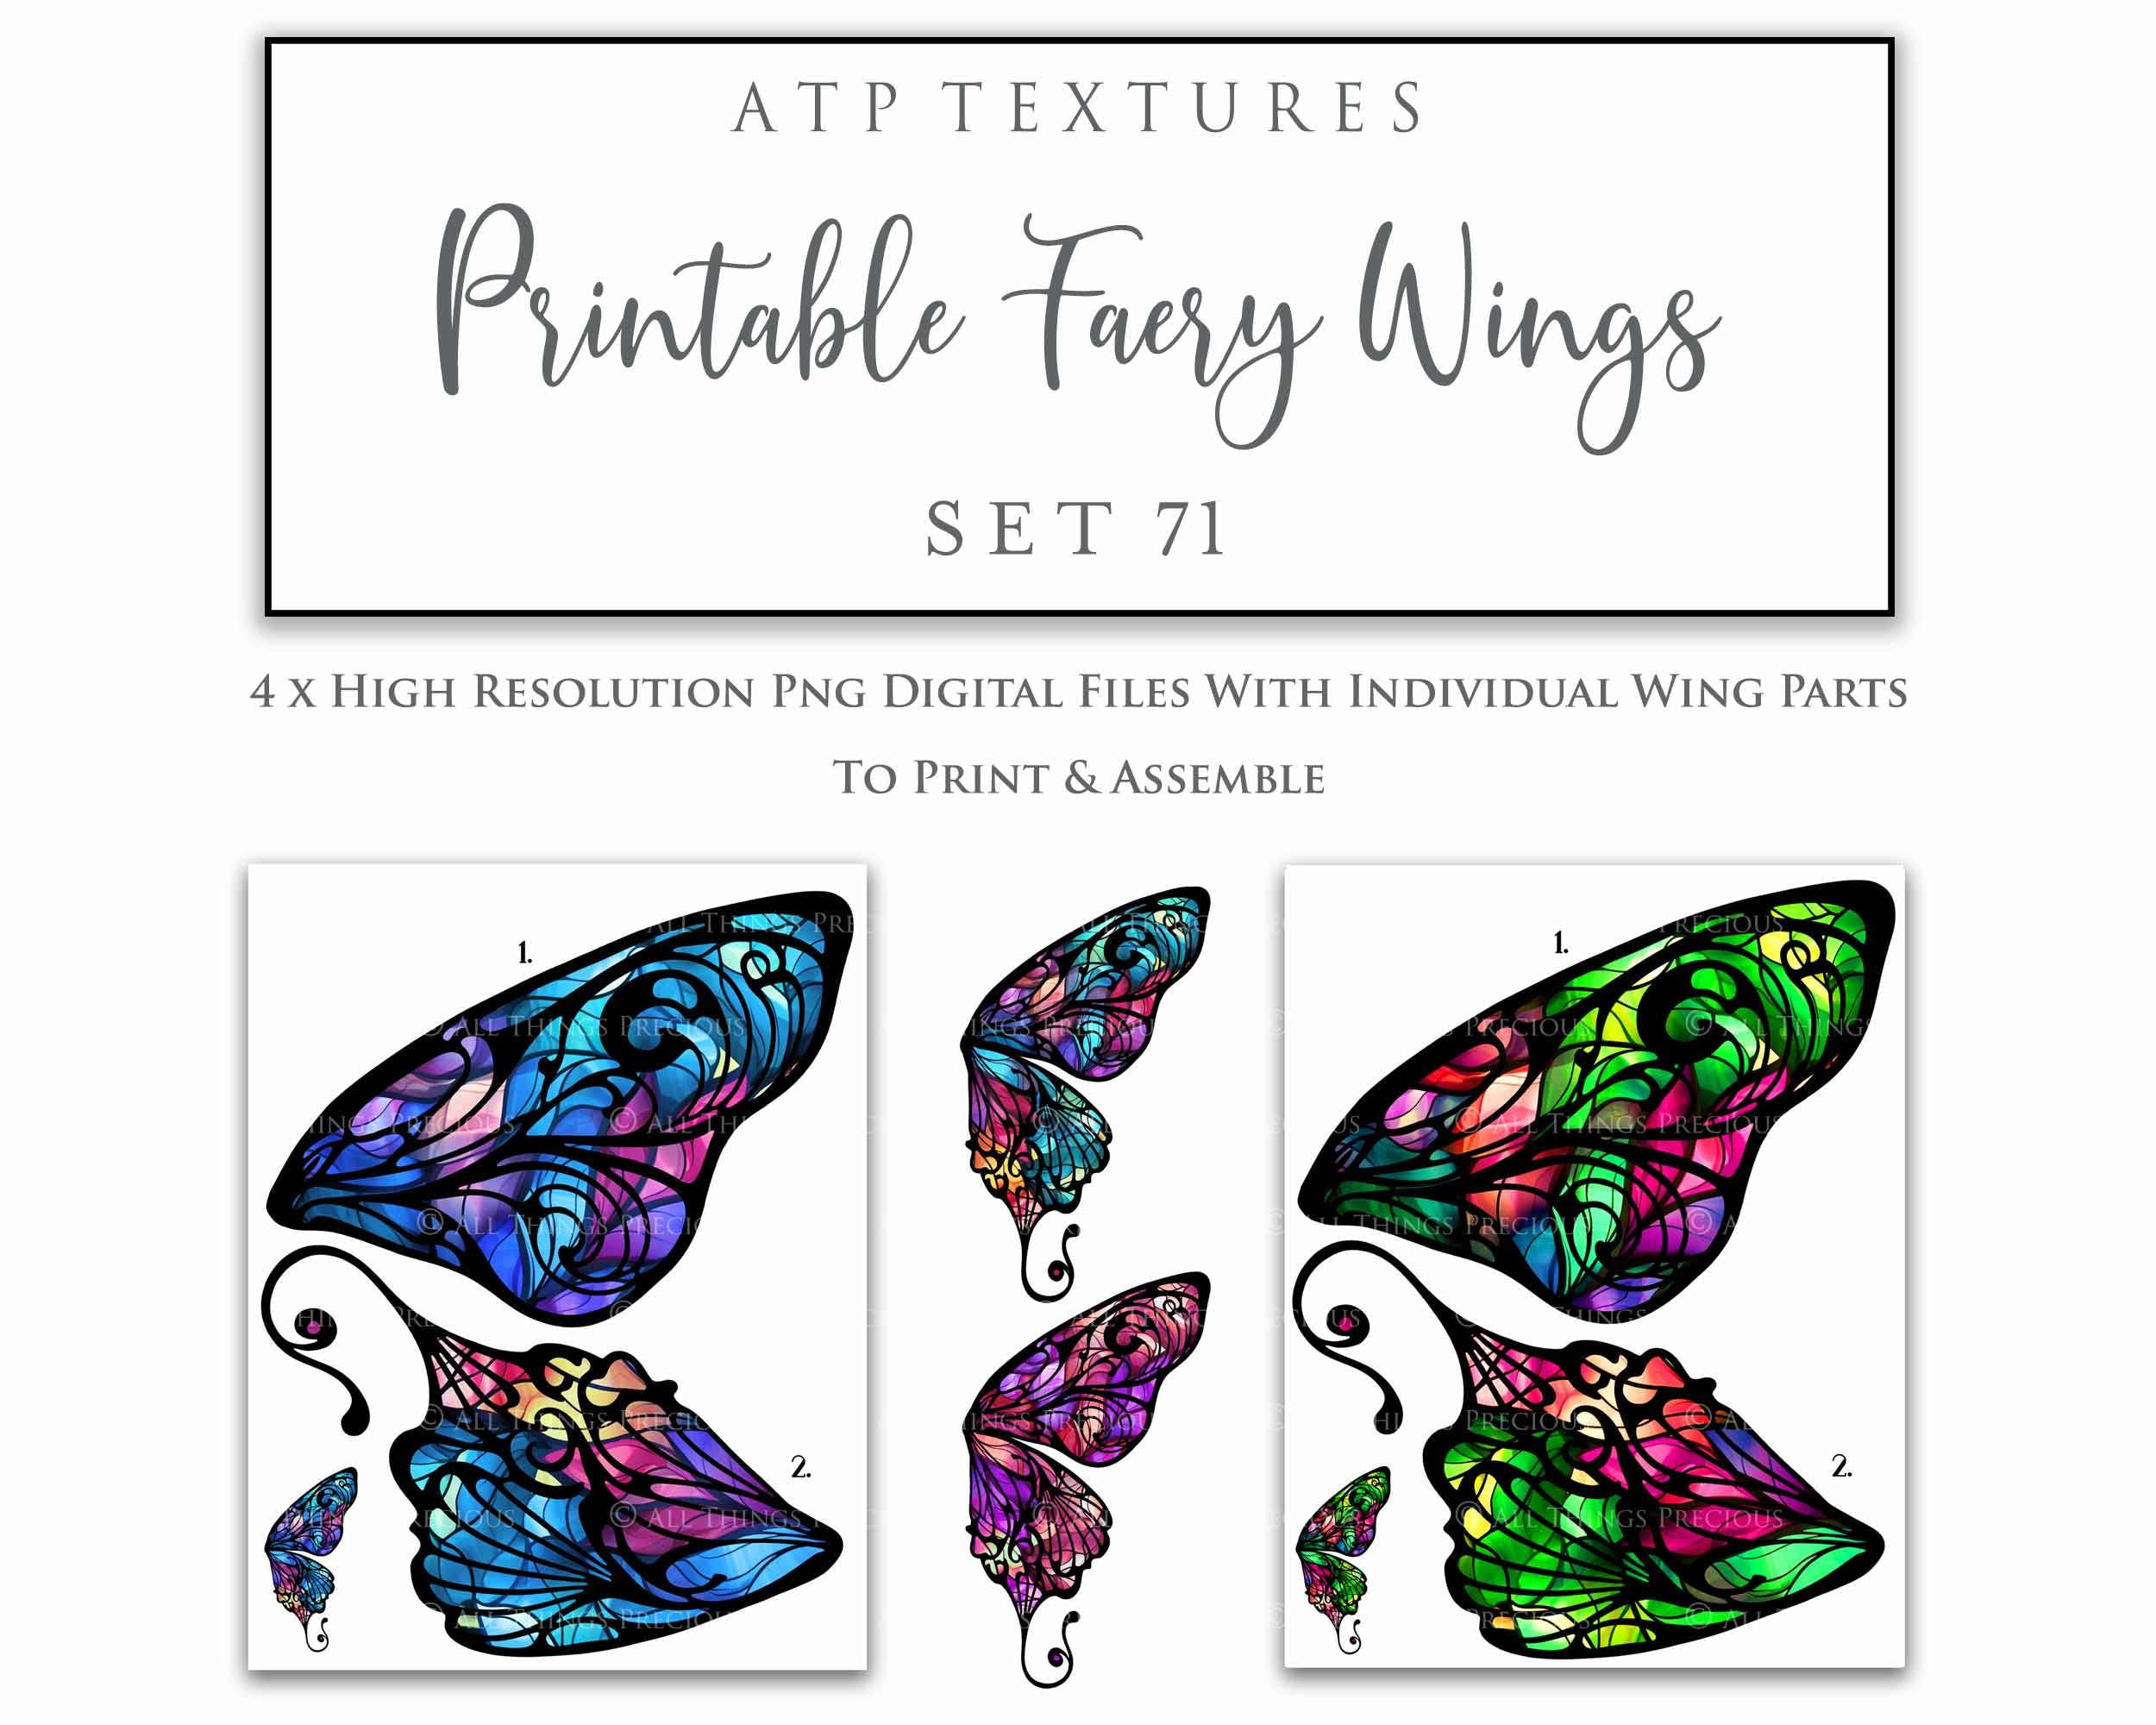 Printable Fairy Wings. For Art Dolls, Adults, Kids. High resolution, png files. This is a digital product. Print and cut Pattern template. Paper craft. Kids or Adult sizes. Create fairy wing earrings or crown jewelry from these designs. Cosplay Costume Crafts. Commercial licence is available. Halloween.